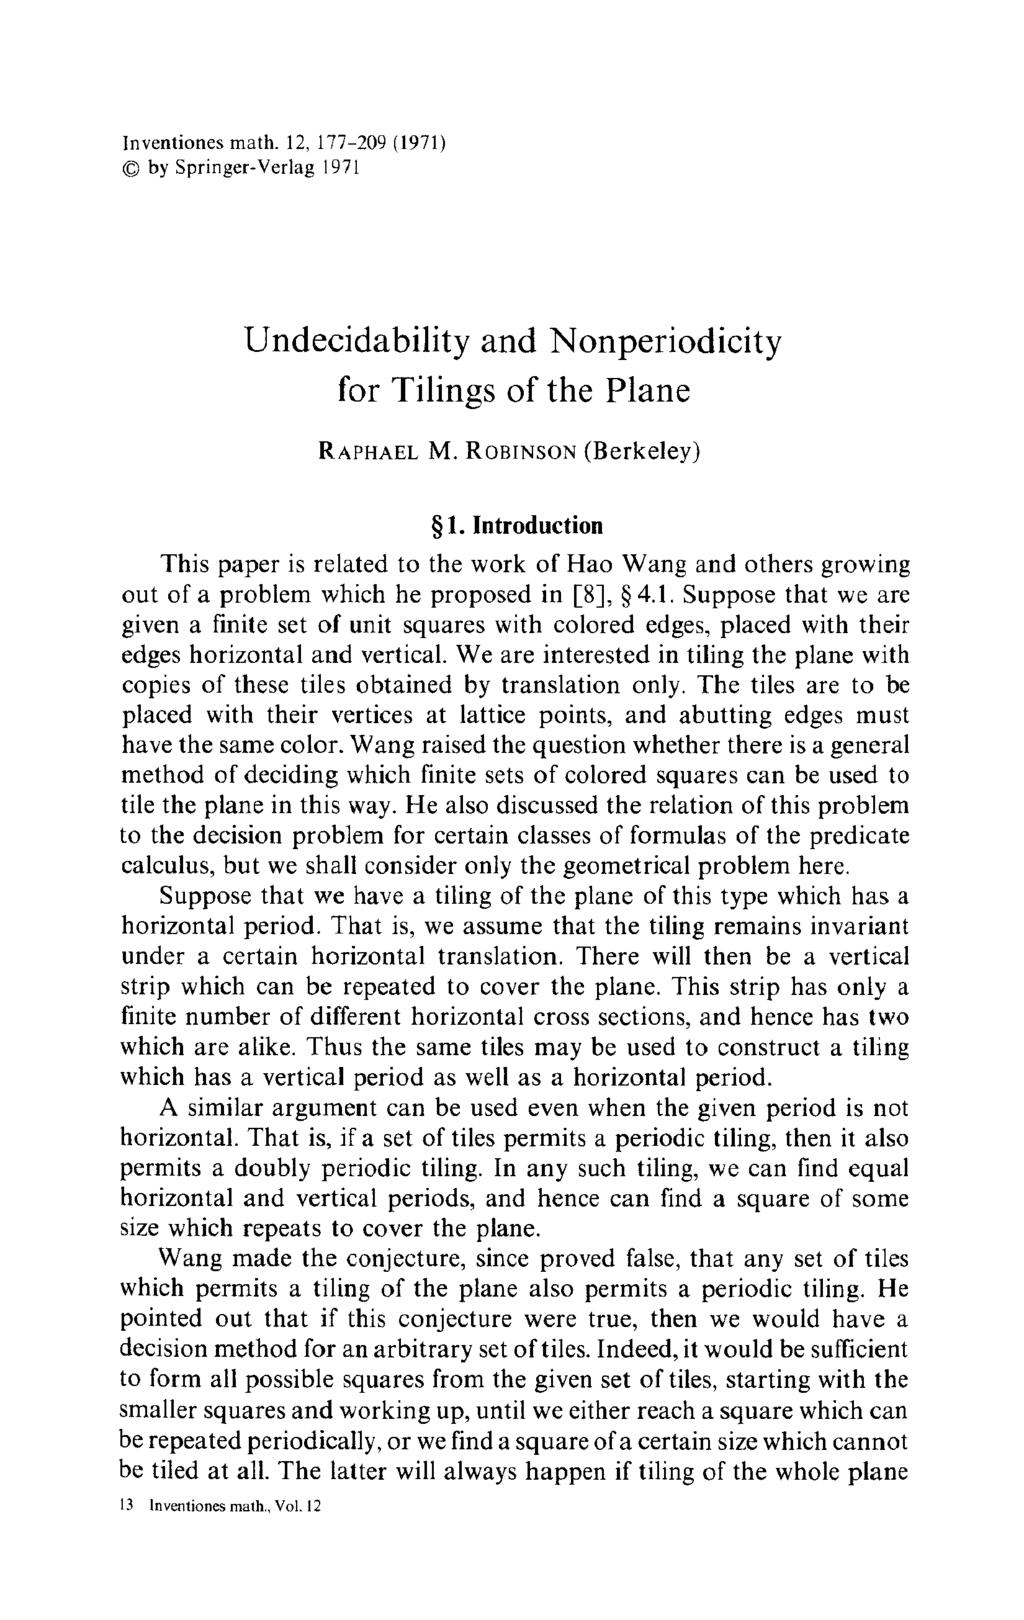 lnventiones math. 12, 177-209 (1971) 9 by Springer-Verlag 1971 Undecidability and Nonperiodicity for Tilings of the Plane RAPHAEL M. ROBrNSOY (Berkeley) w 1.